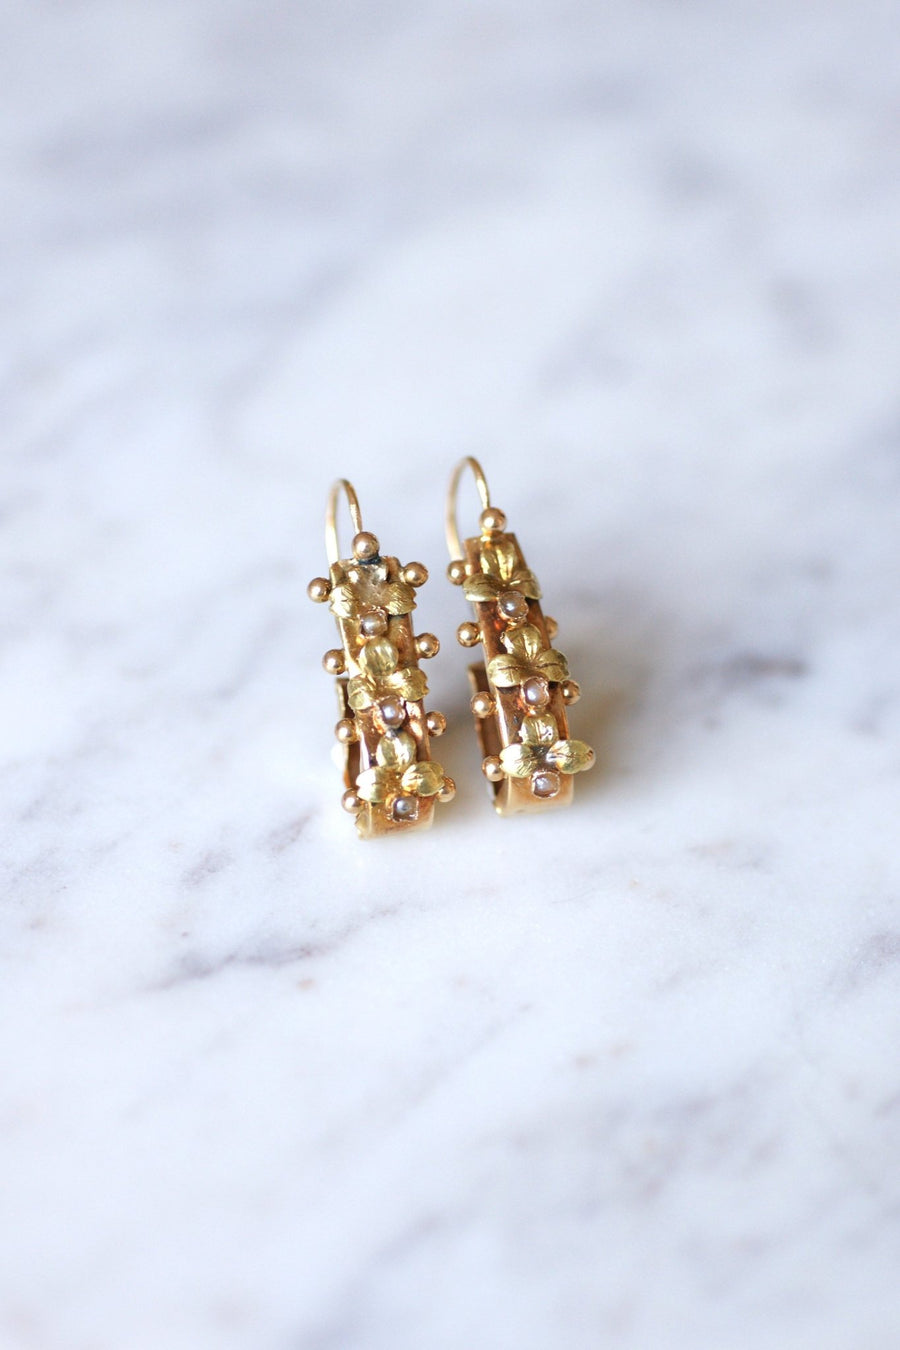 Antique gold and pearl earrings - Galerie Pénélope